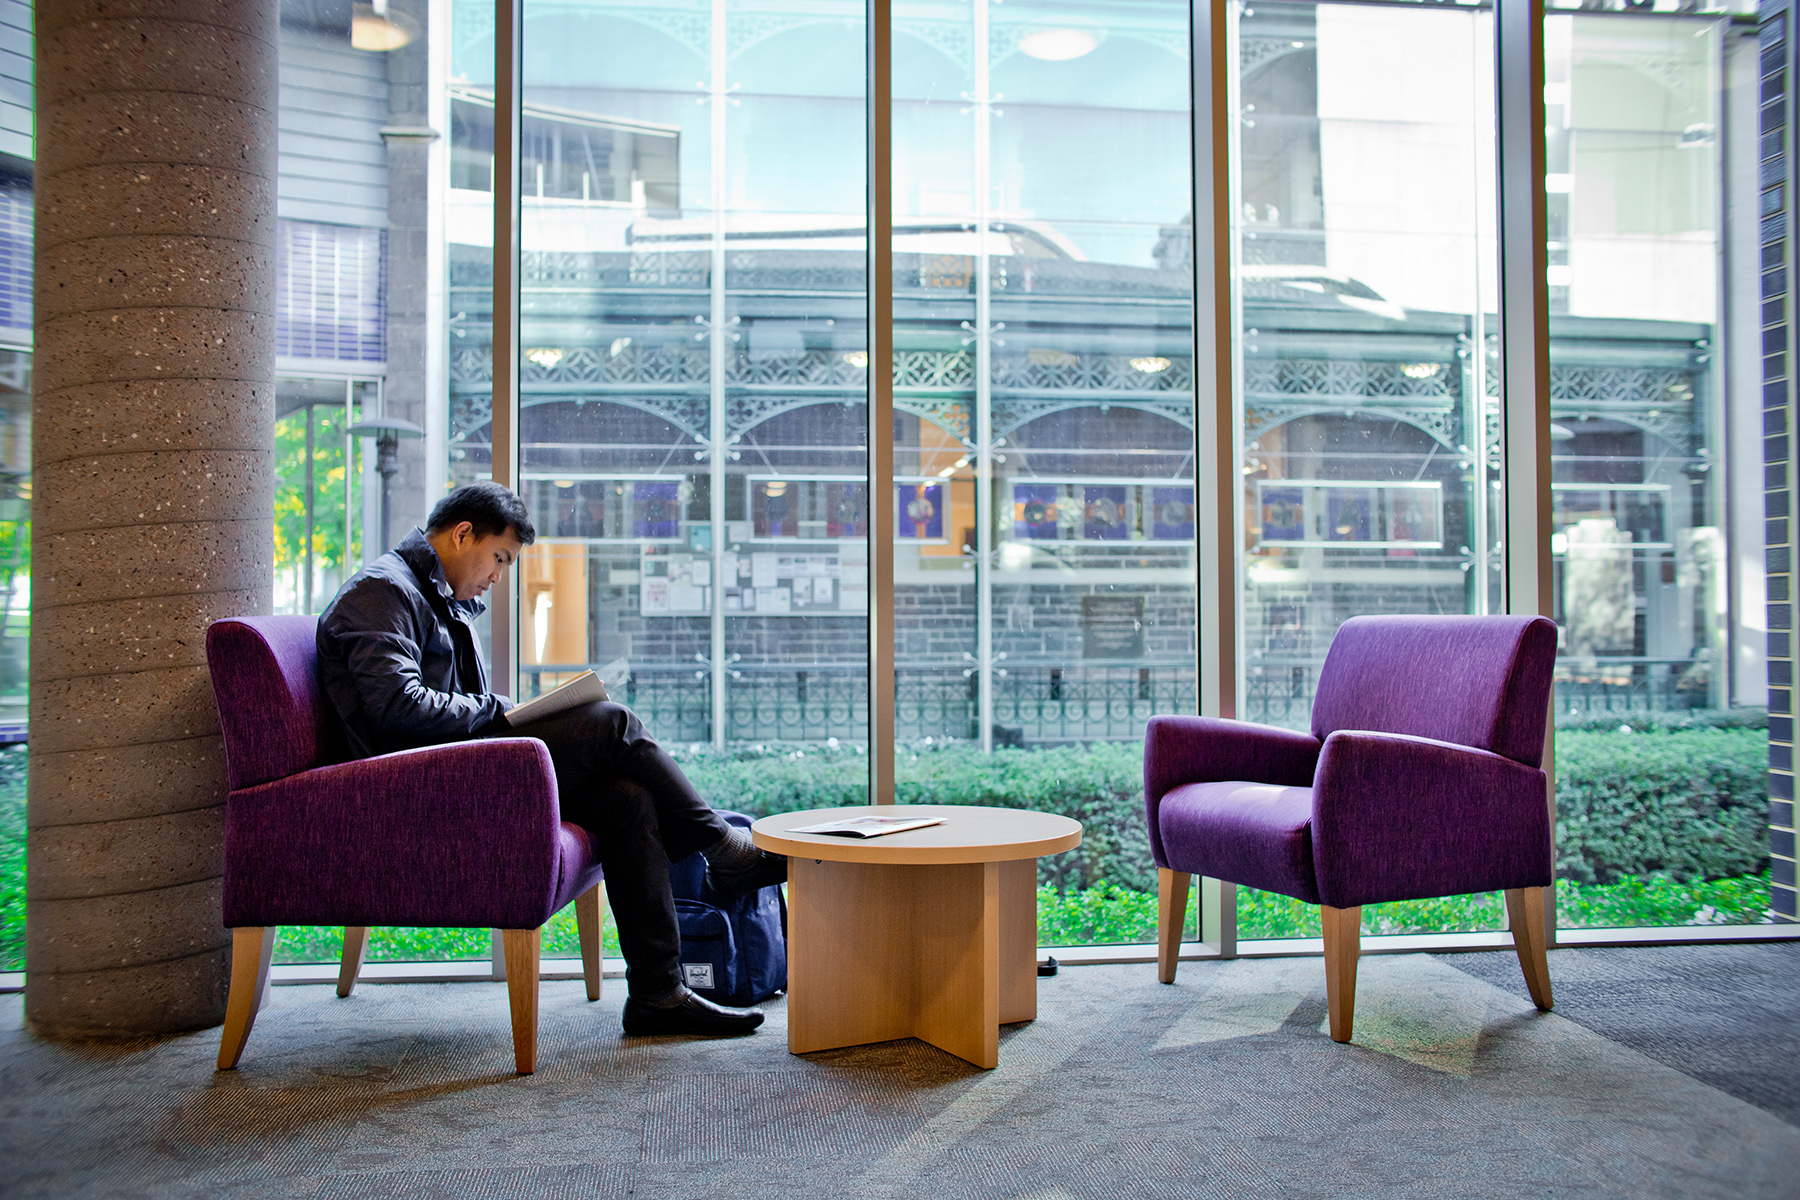 Male student seated on one of two purple chairs by a wooden coffee table in the level 2 foyer by the glass wall/window looking out into the garden